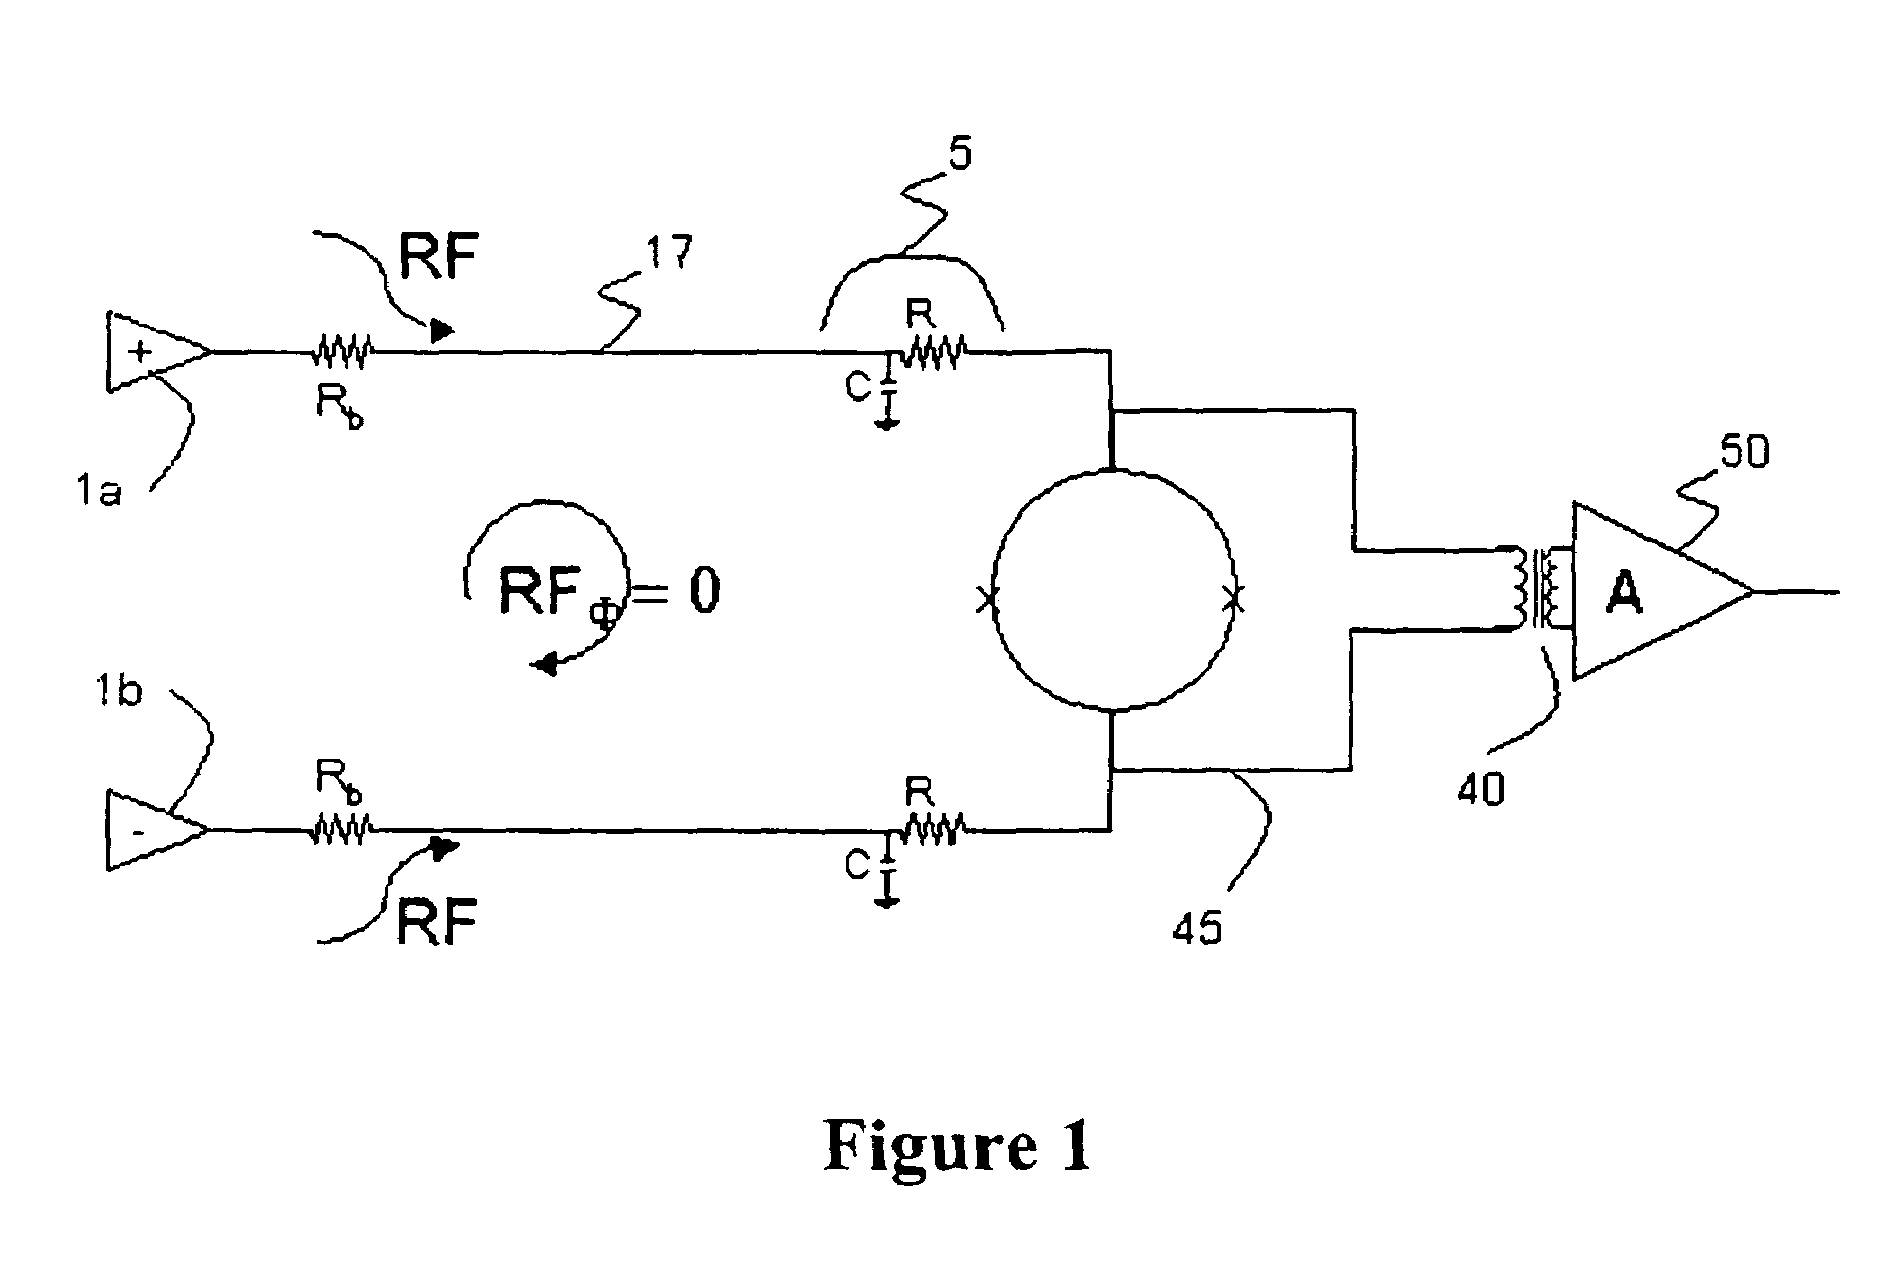 Apparatus for measuring magnetic fields using a superconducting quantum interference device